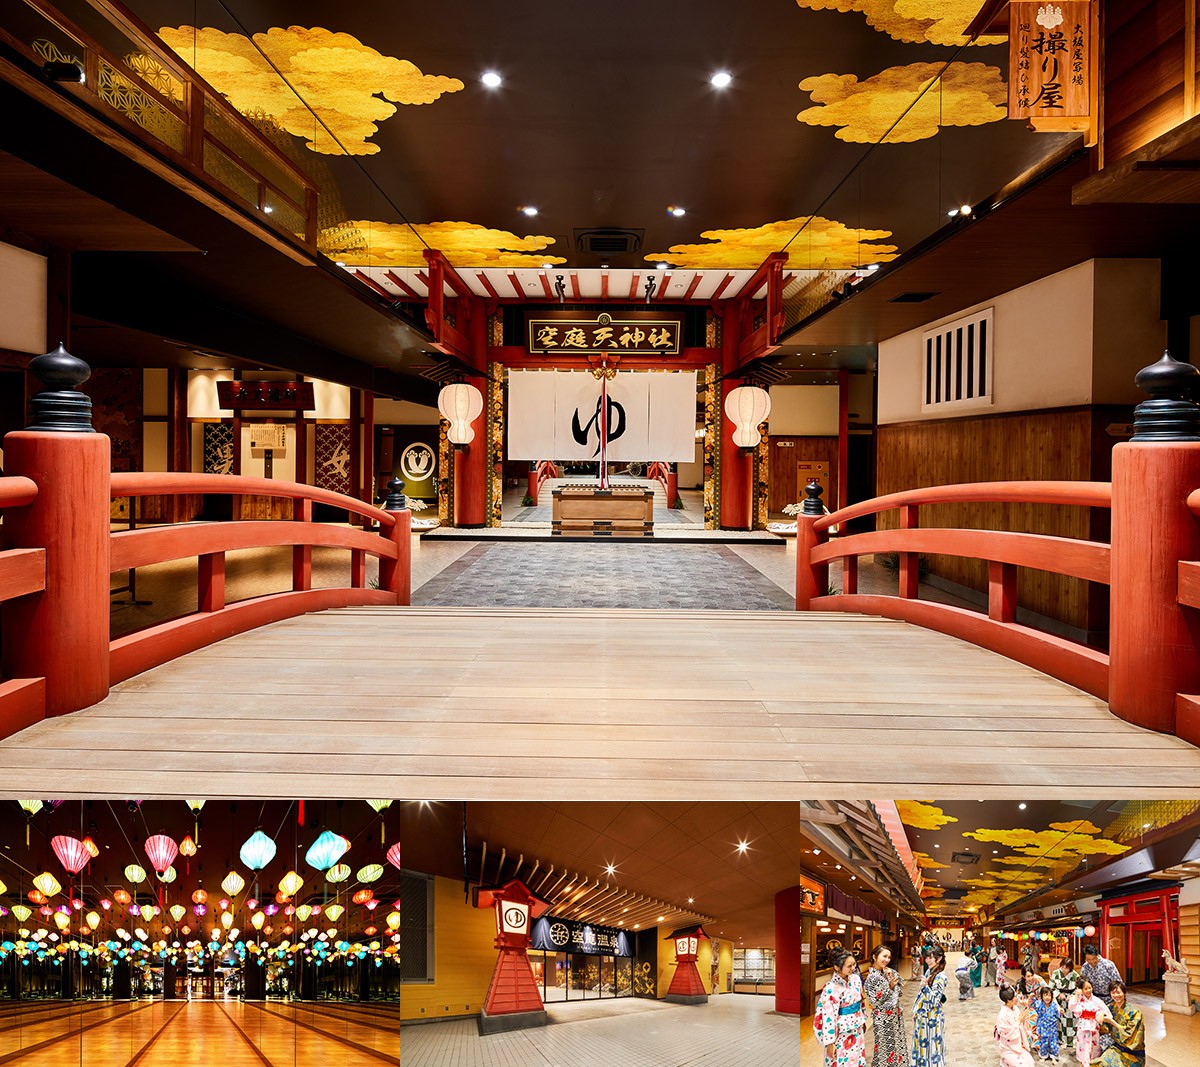 Solaniwa Onsen, one of Kansai's largest hot spring theme parks, where you can spend a whole day